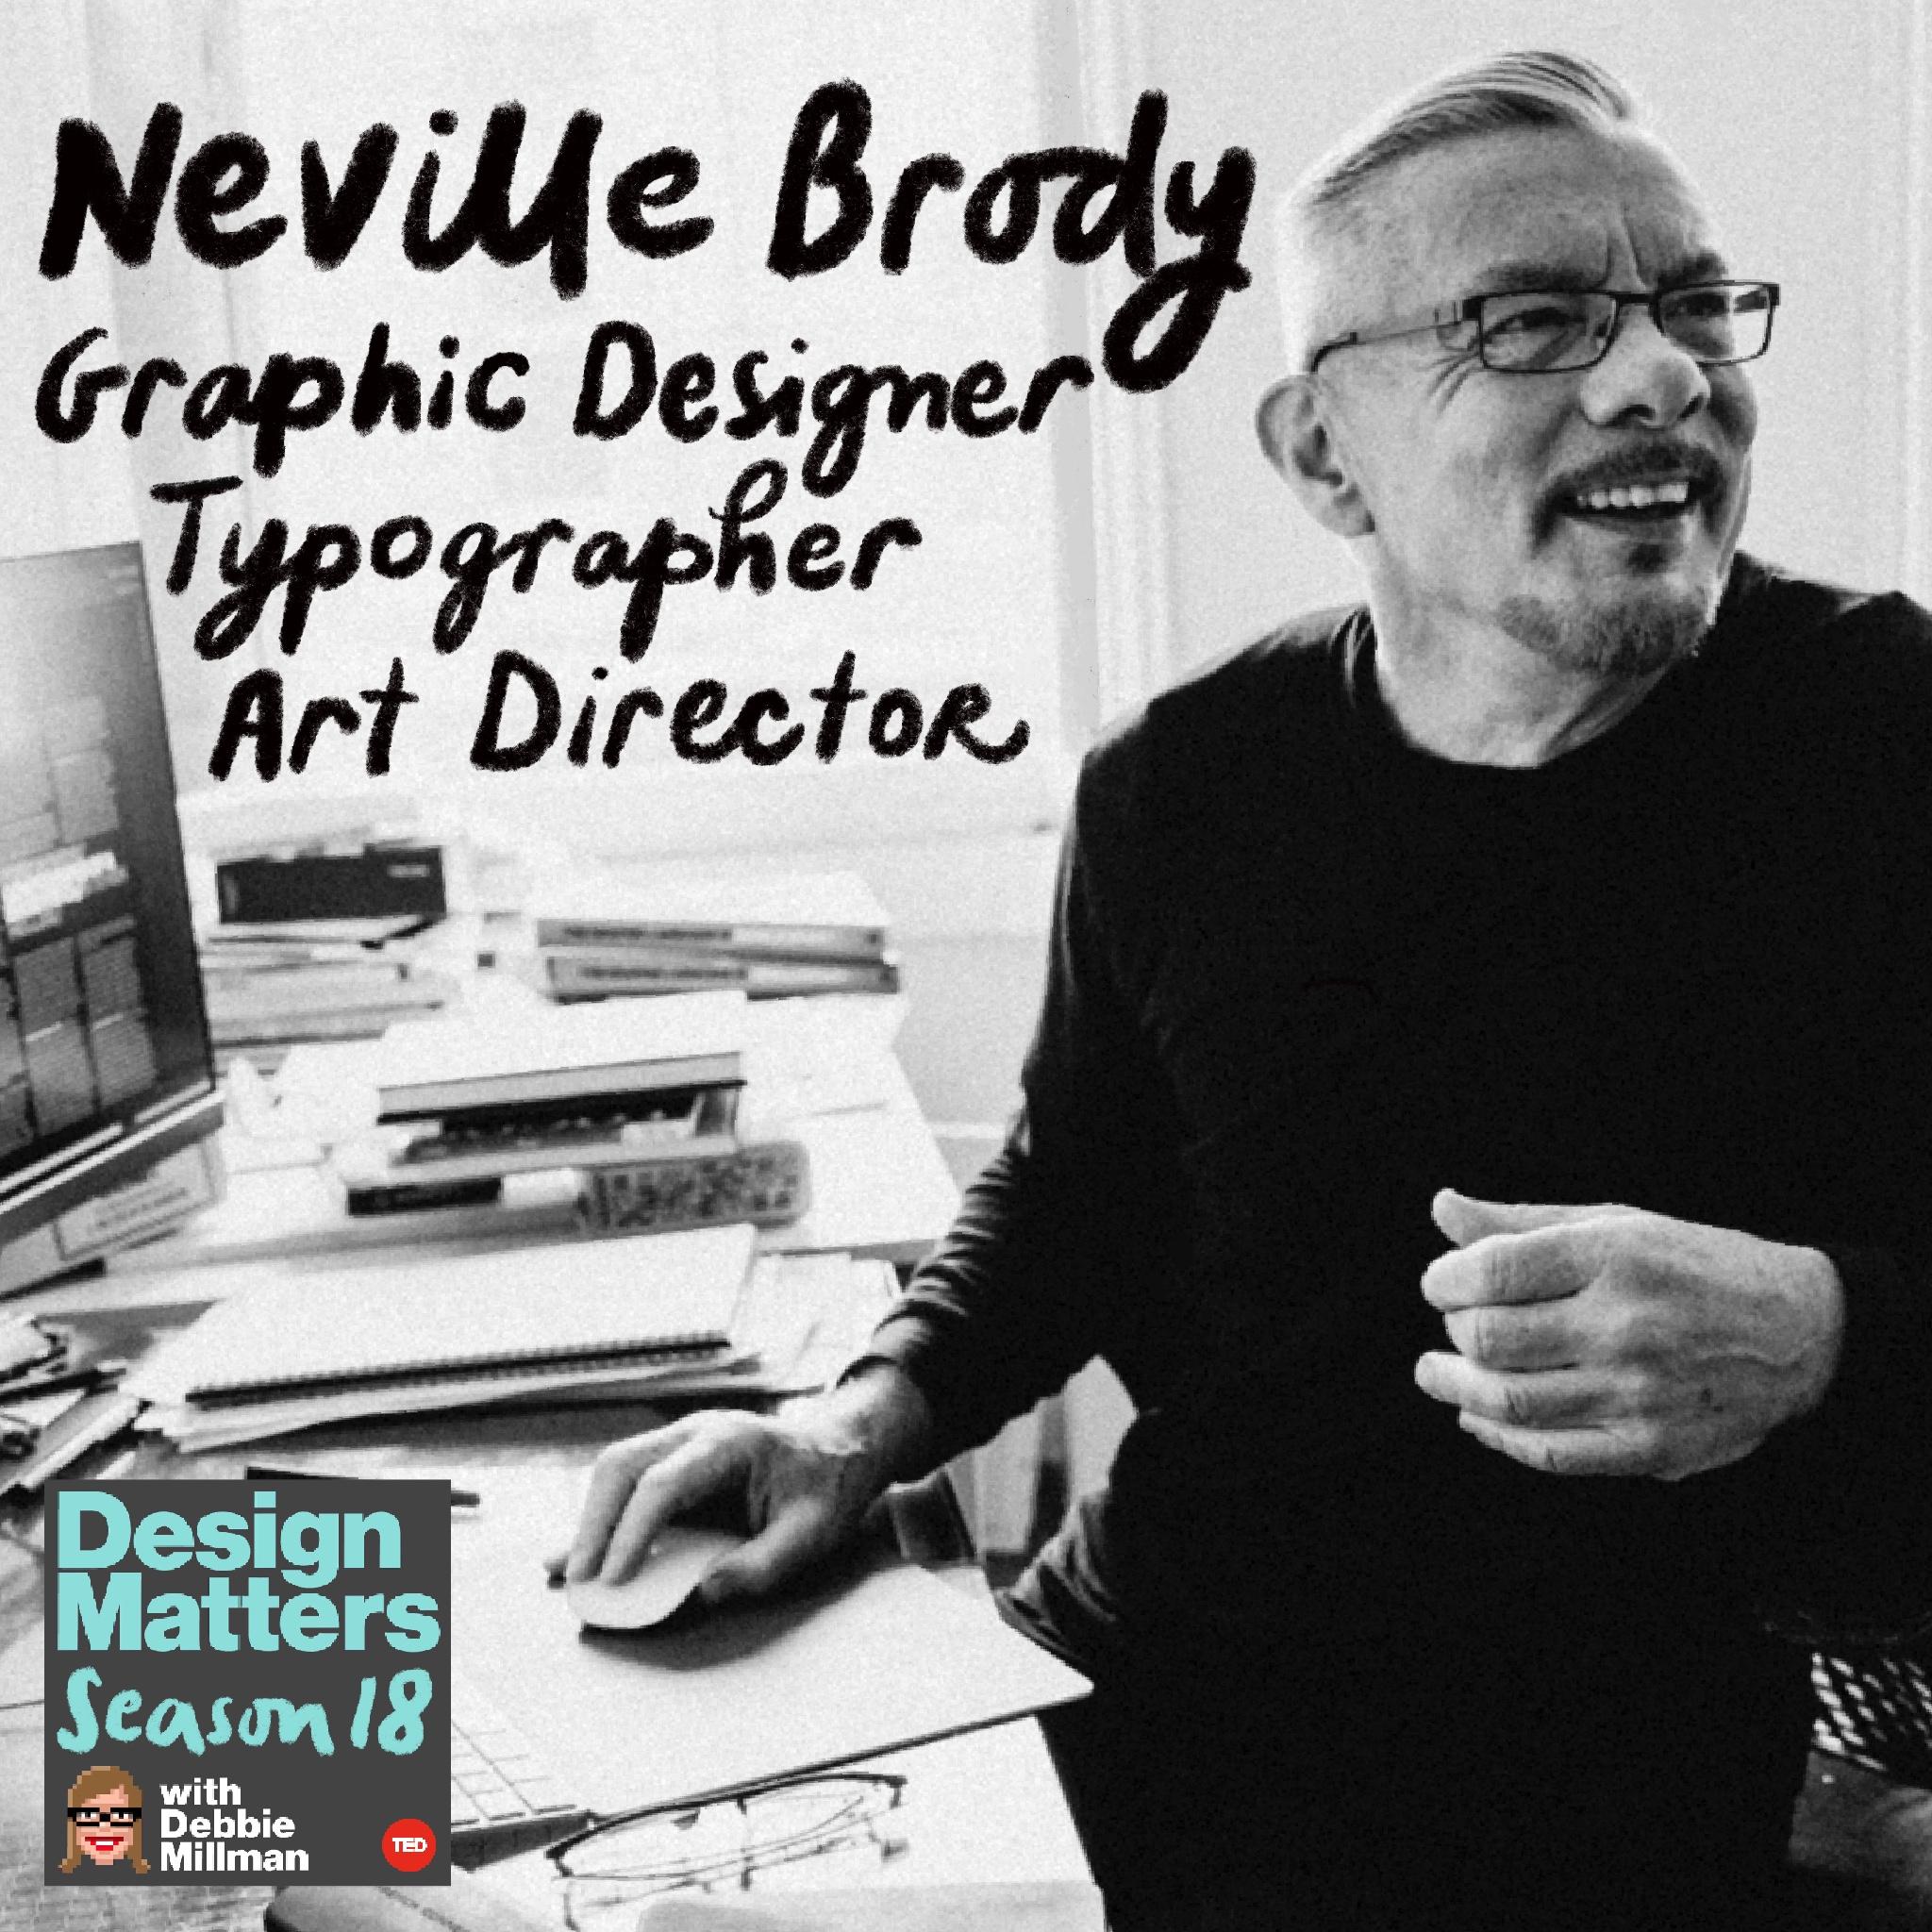 Thumbnail for "Neville Brody".